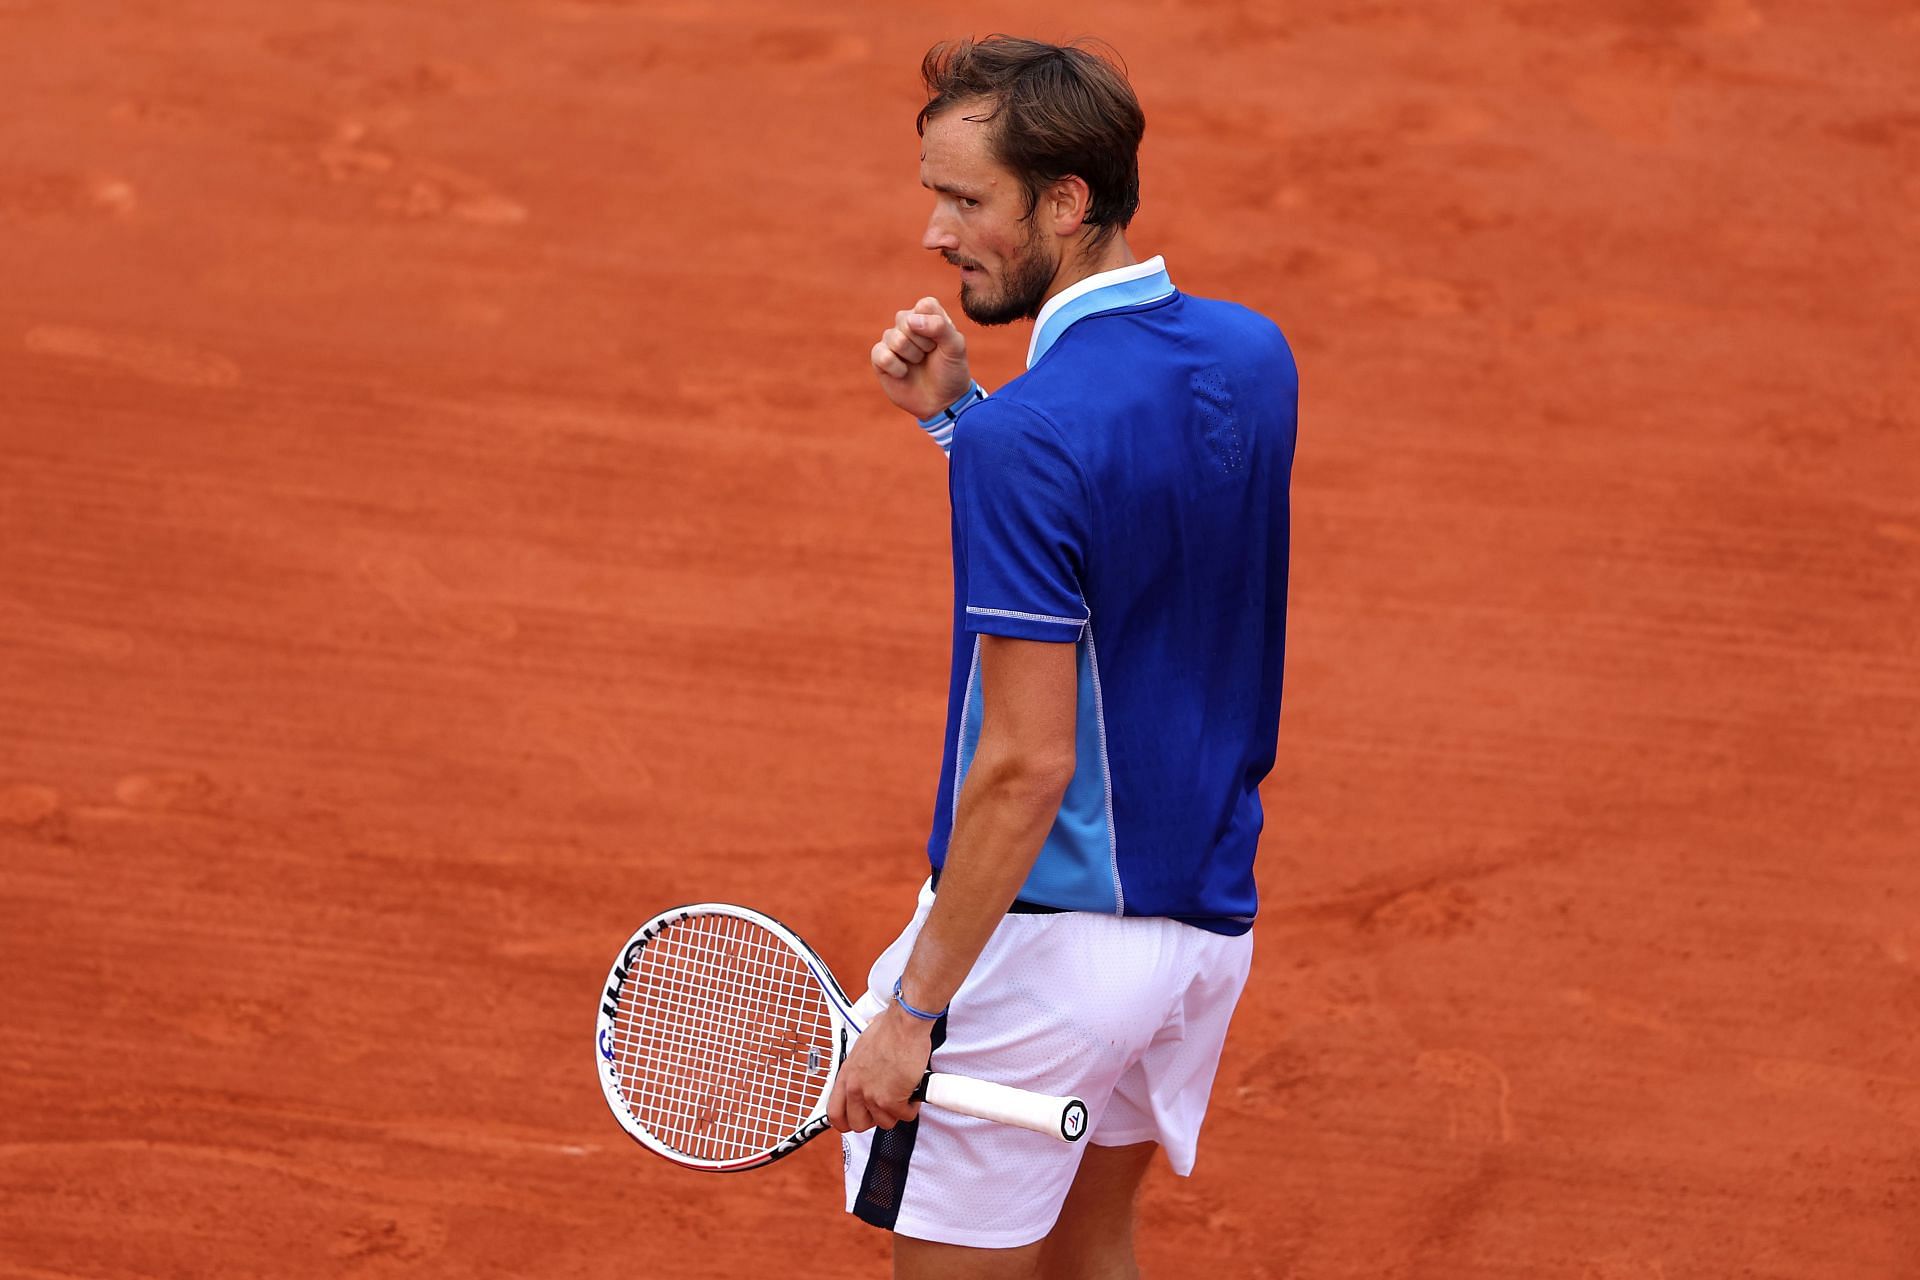 French Open 2022 Daniil Medvedev vs Marin Cilic preview, head-to-head, prediction, odds and pick Roland Garros